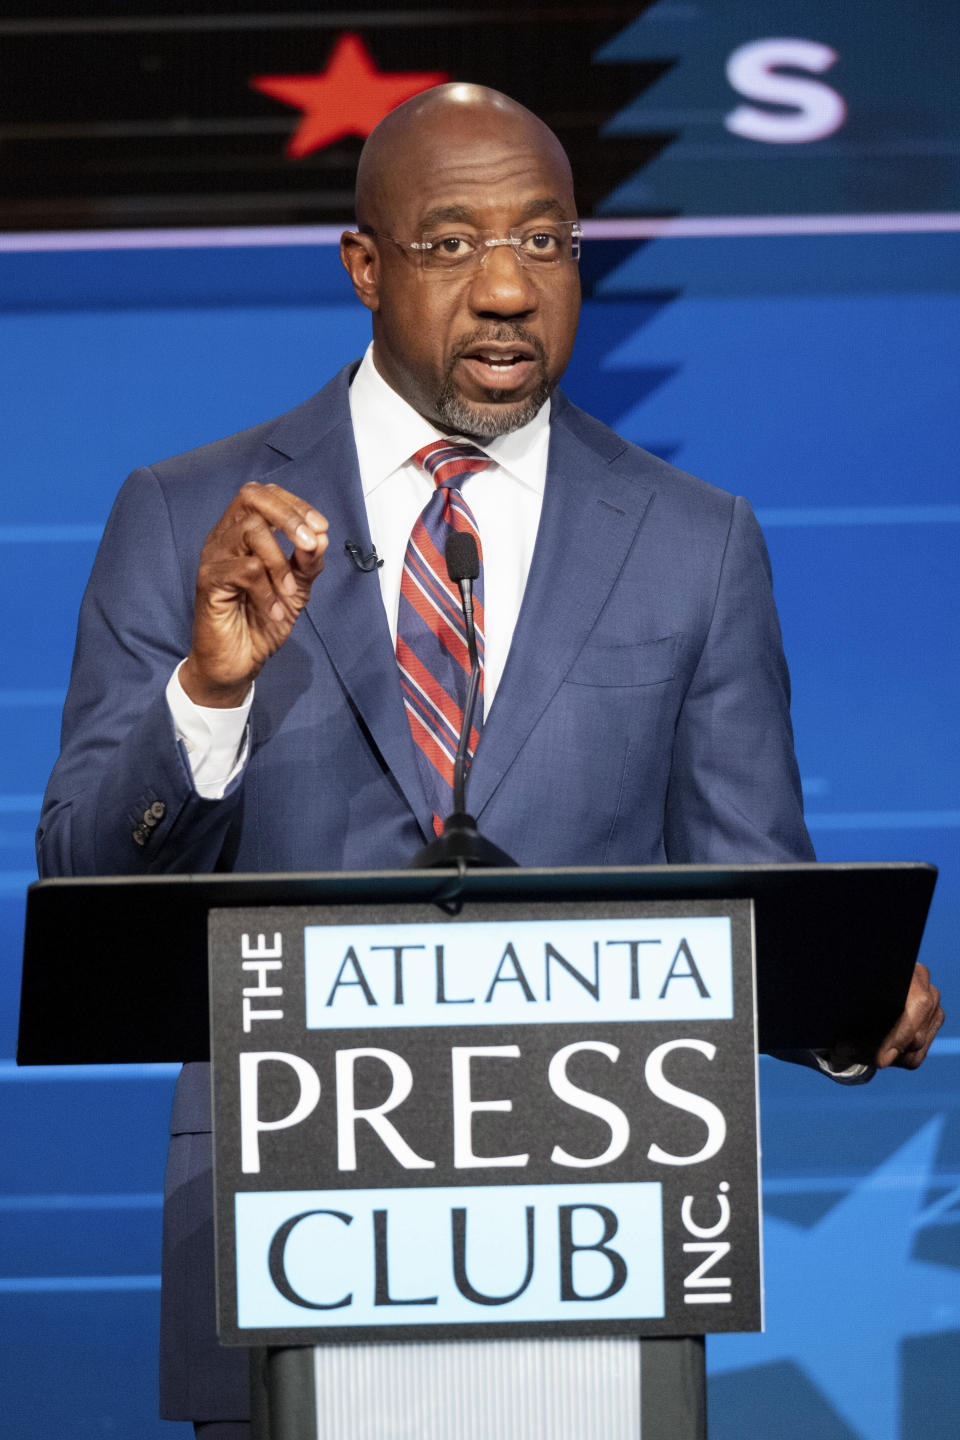 Sen. Raphael Warnock, D-Ga., speaks during a U.S. Senate debate with Libertarian challenger Chase Oliver during the Atlanta Press Club Loudermilk-Young Debate Series in Atlanta on Sunday, Oct. 16, 2022. Republican challenger Herschel Walker was invited but did not attend. (AP Photo/Ben Gray)